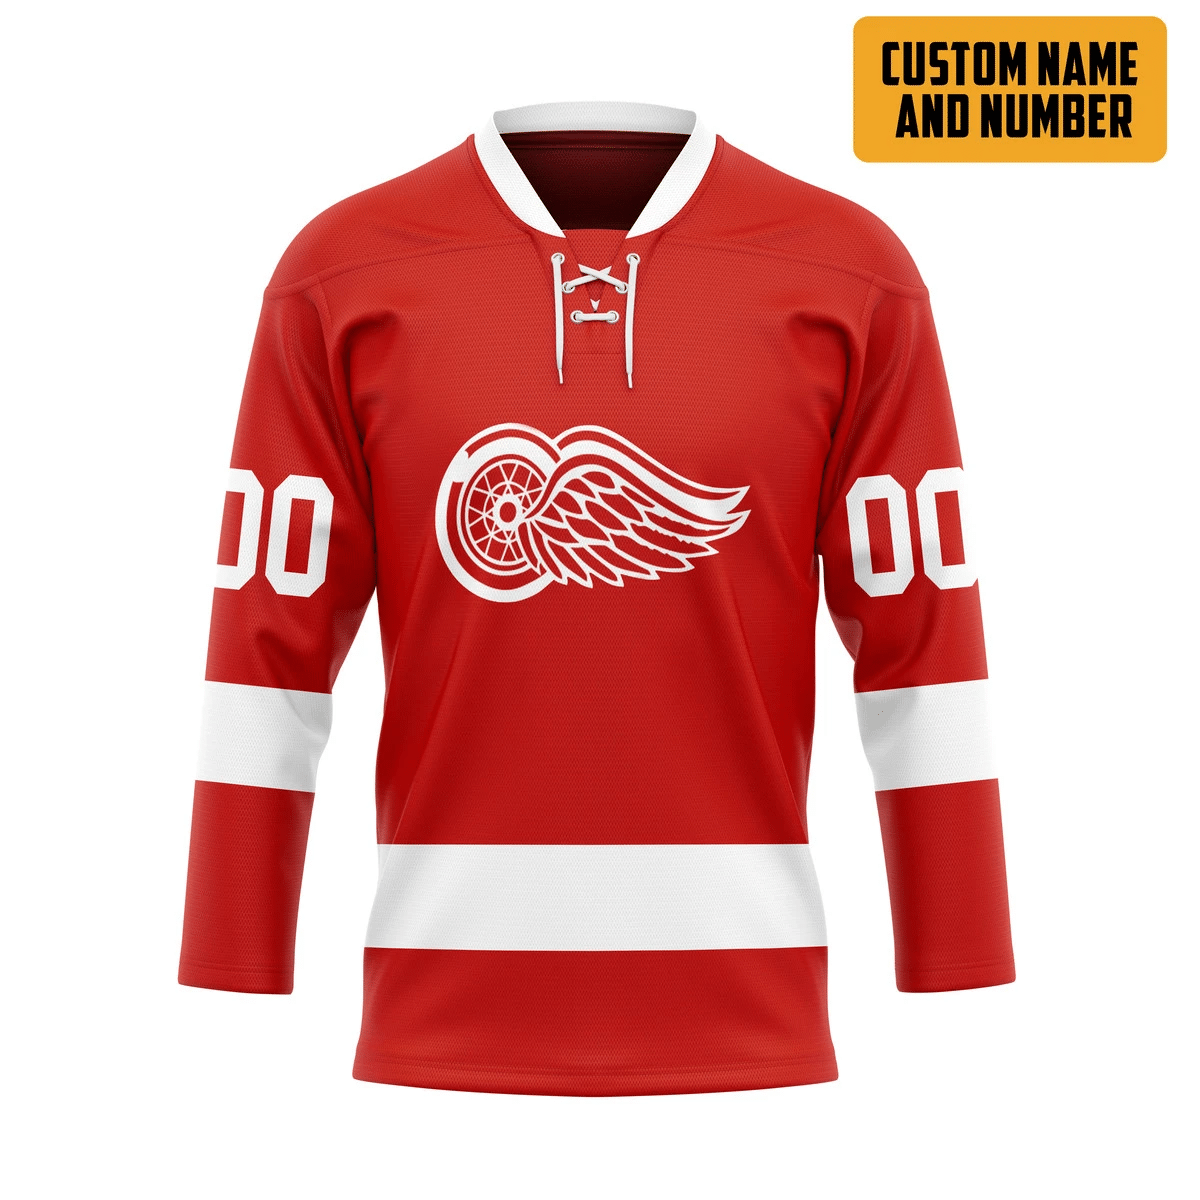 Check out our collection of unique and stylish hockey jerseys from all over the world 88